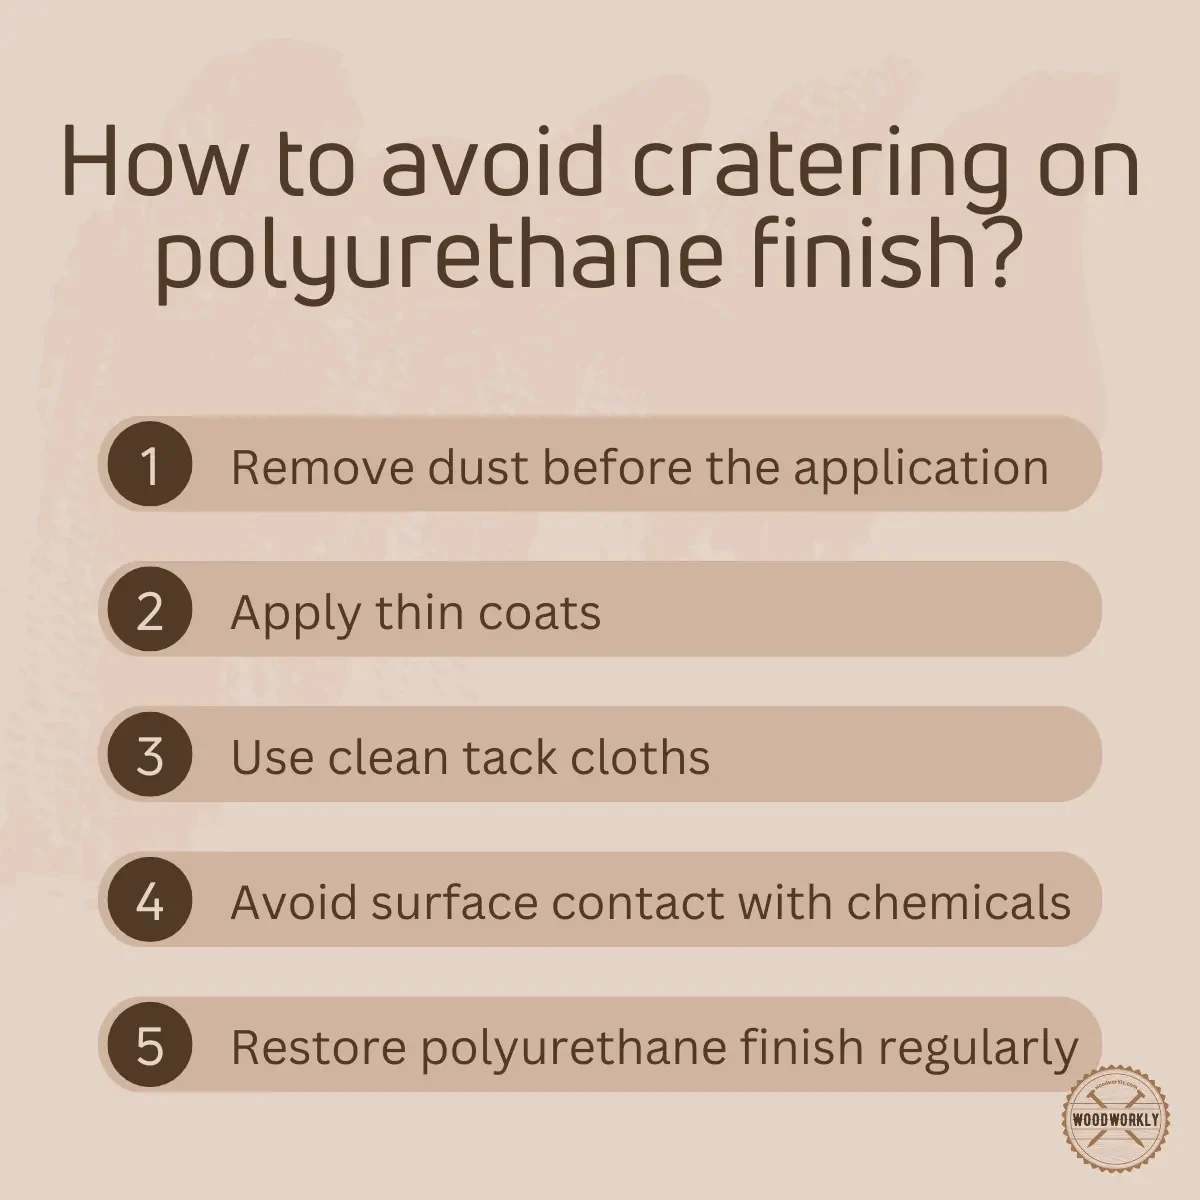 How to avoid cratering on polyurethane finish